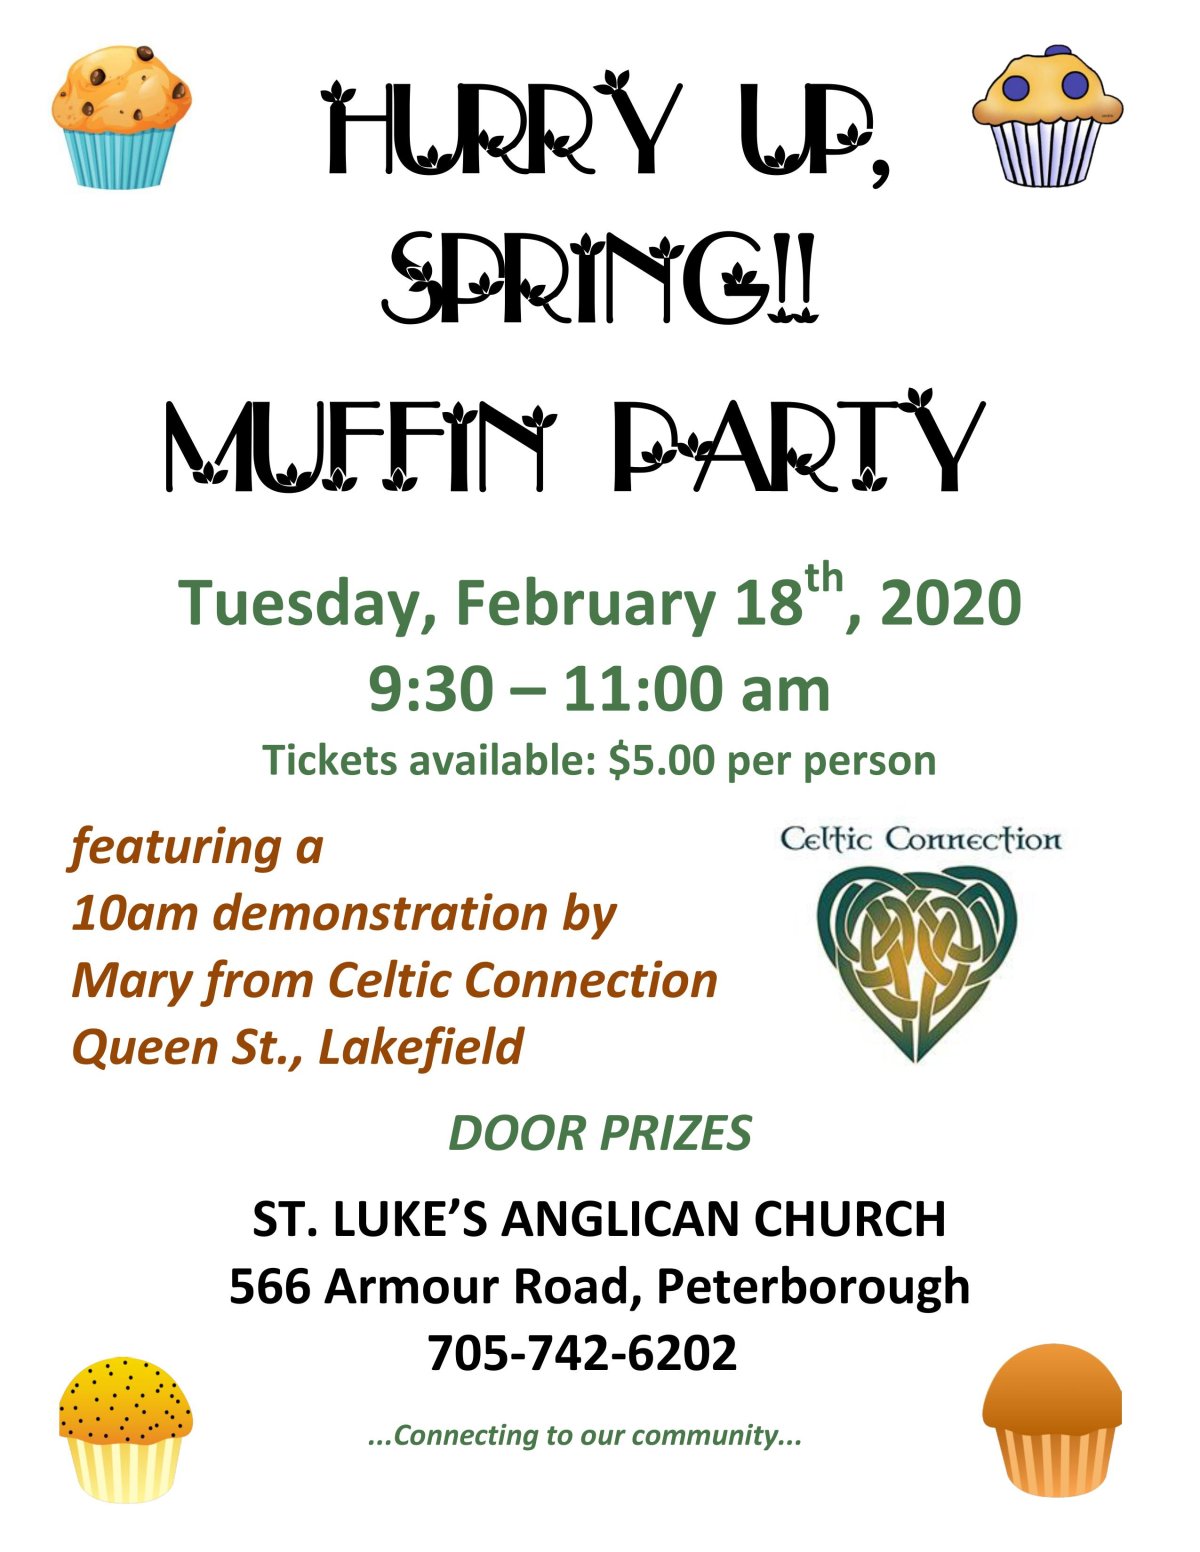 St. Luke’s HURRY UP SPRING!! MUFFIN PARTY - GlobalNews Events